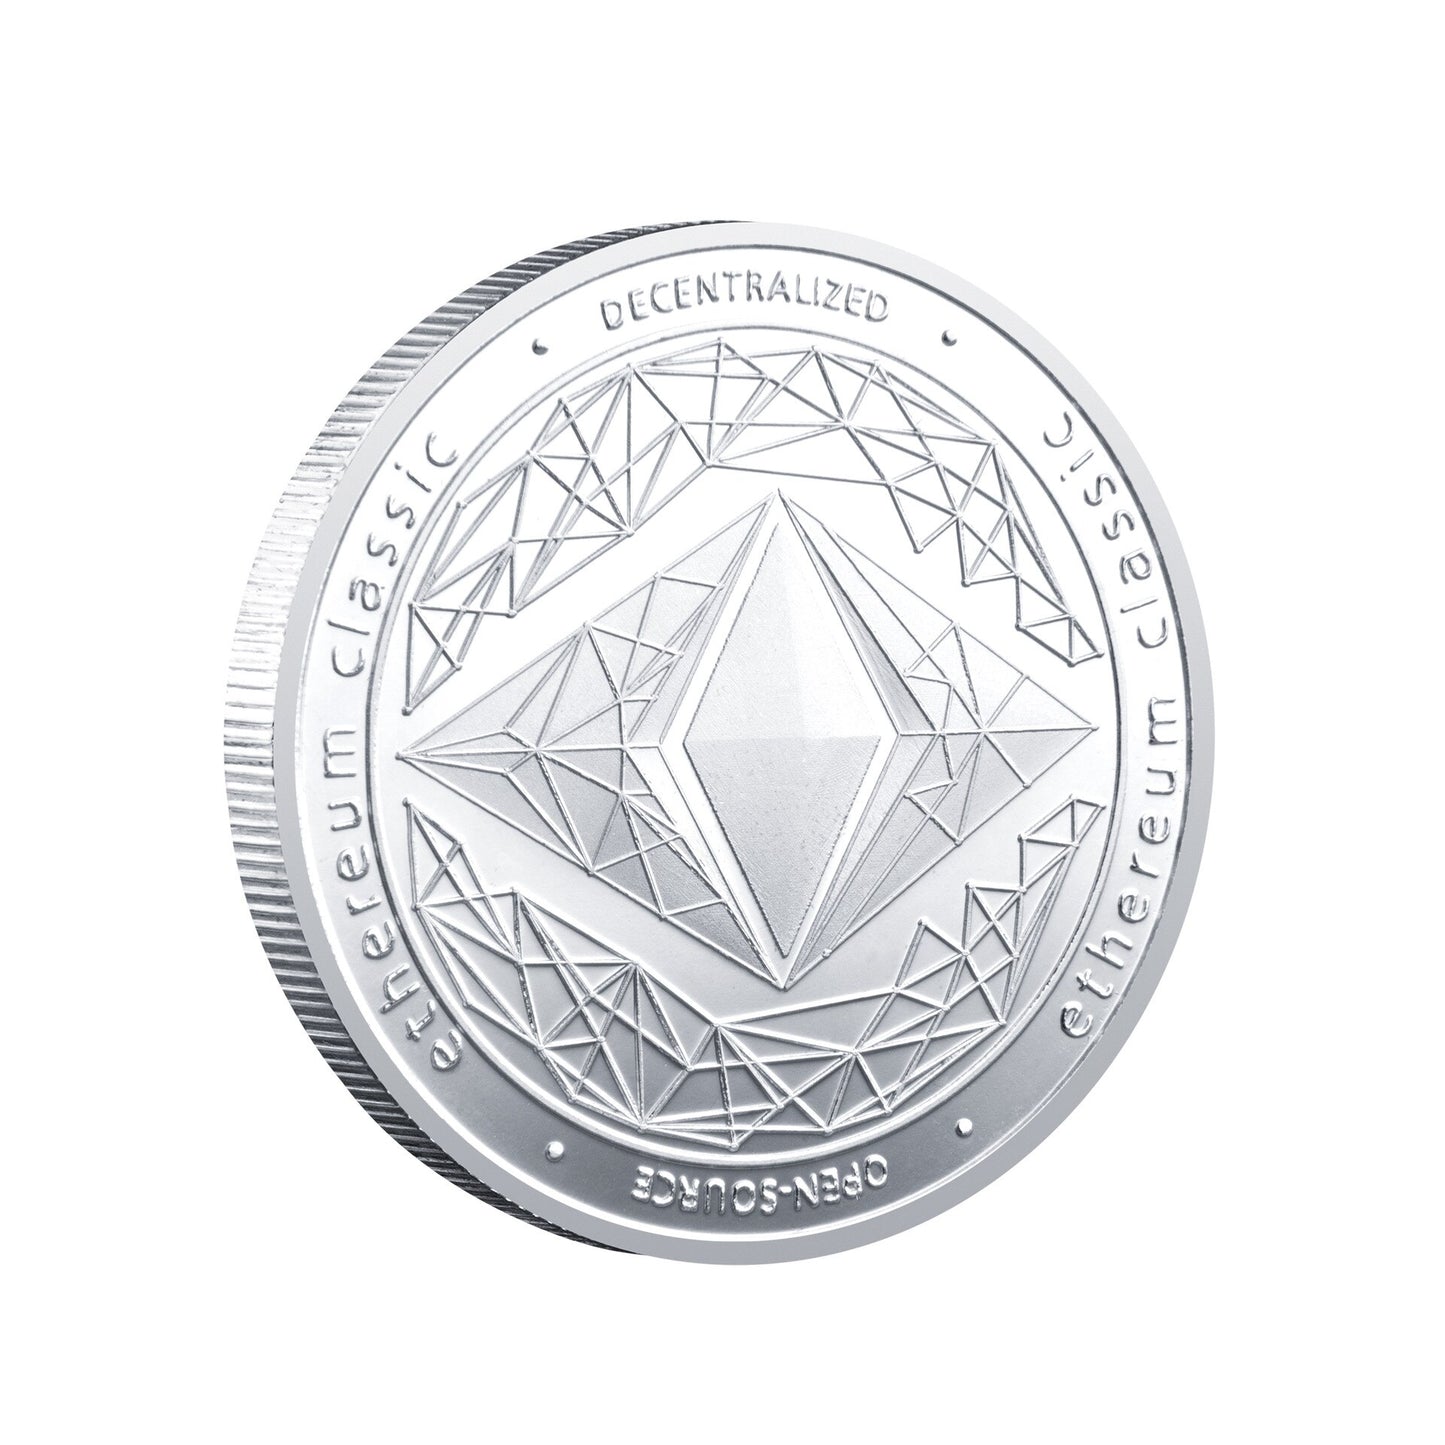 Ethereum Classic  coin Gold and Silver plated